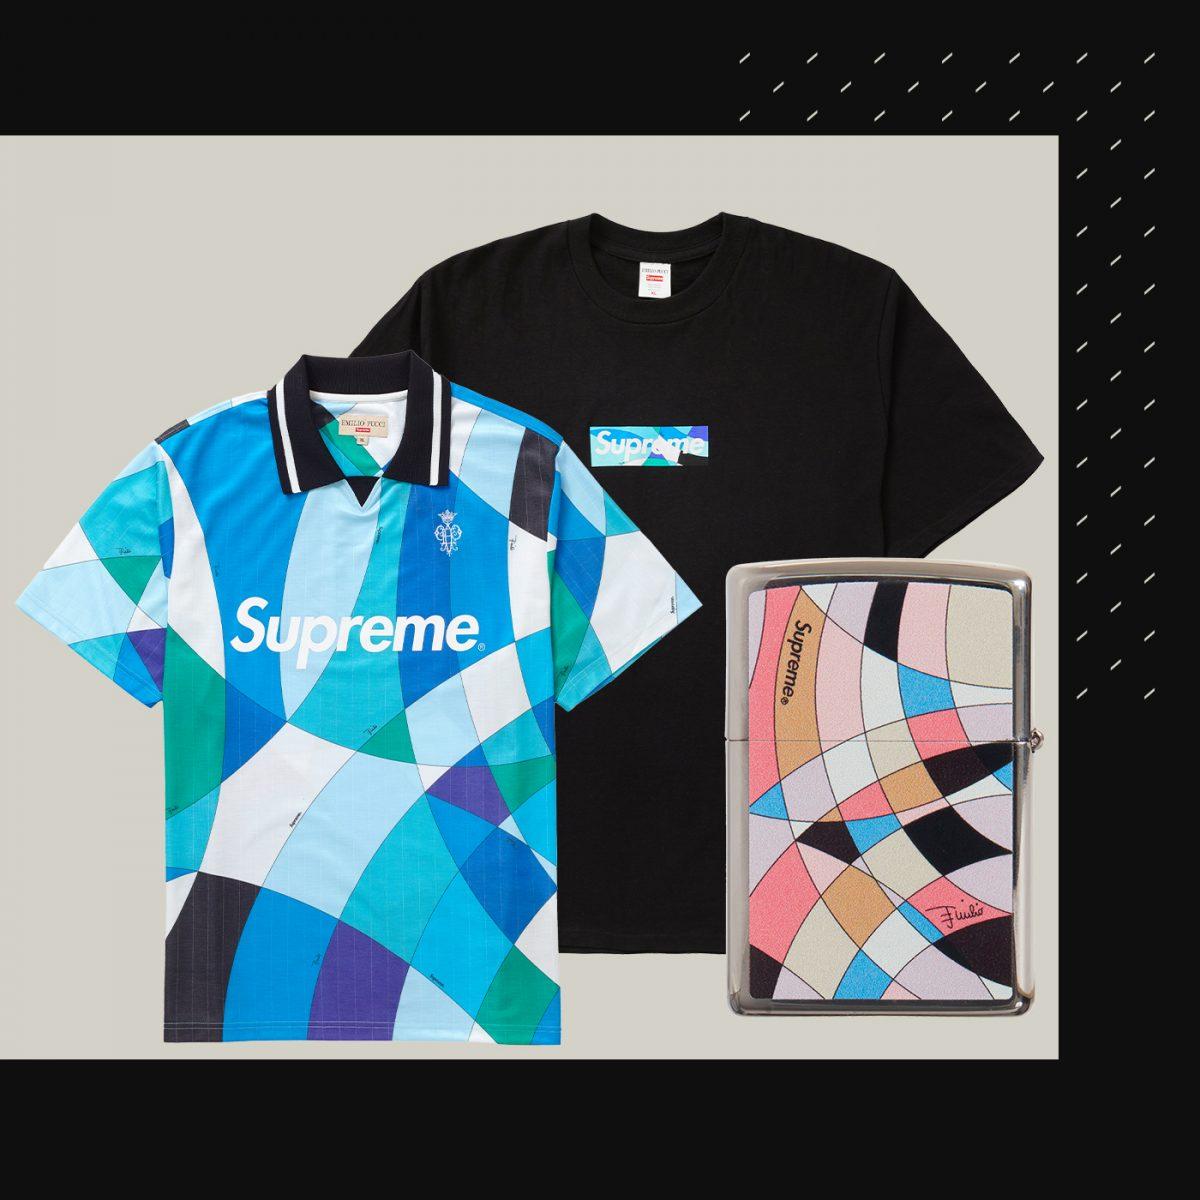 Emilio Pucci Partners with Supreme + More Fashion News to Know